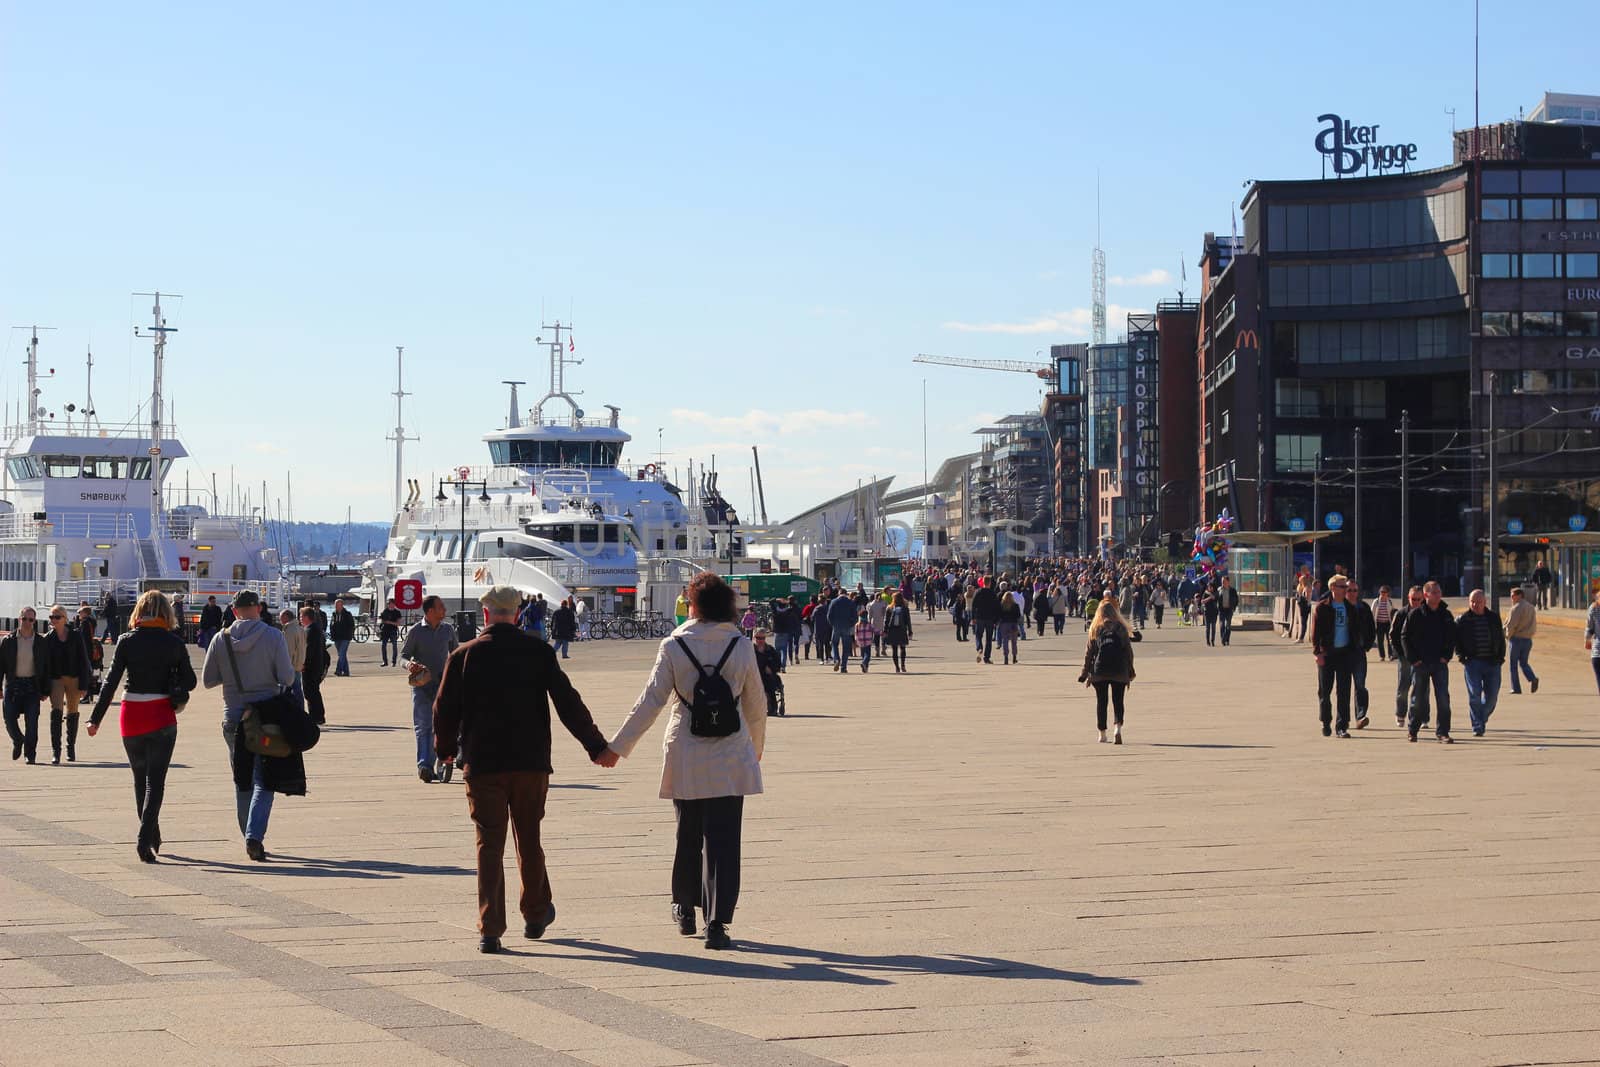 Aker Brygge is an area in Oslo, Norway. It is a popular meeting place for shopping, dining, and entertainment. As many as 12 million visitors a year make Aker Brygge Norway's biggest destination.